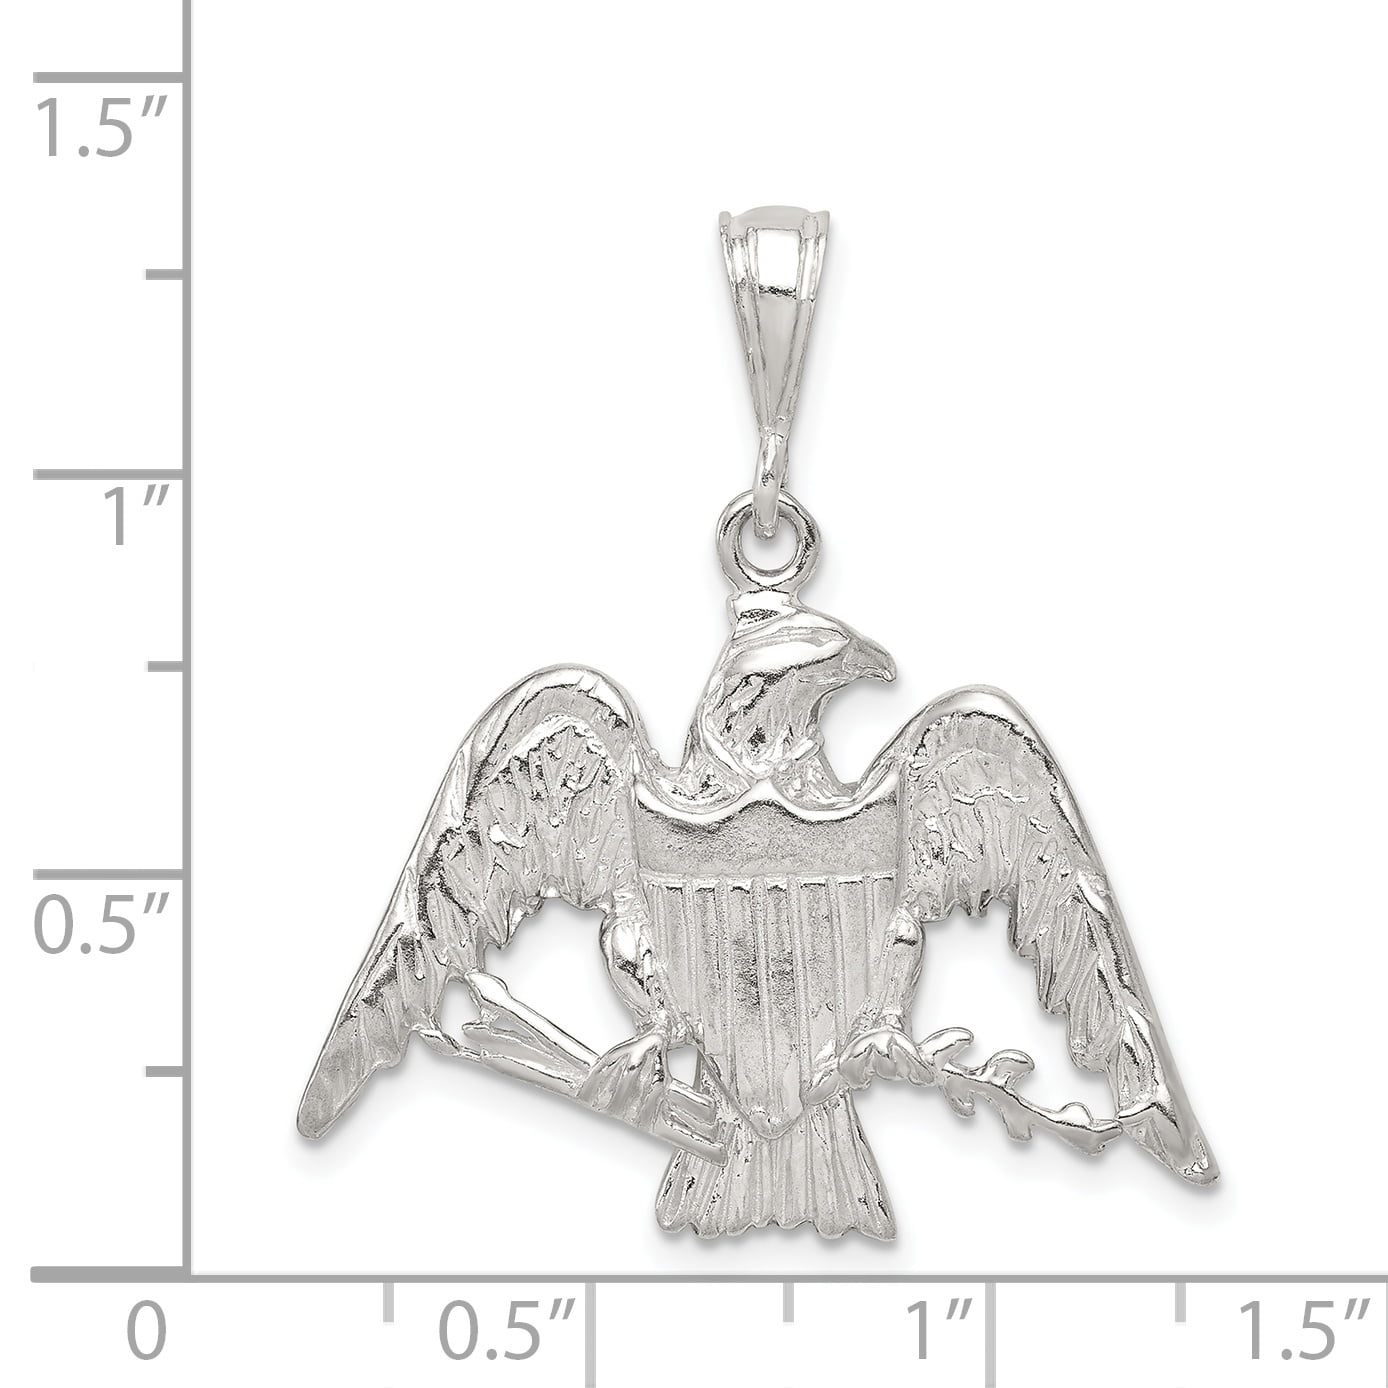 23mm Silver Yellow Plated Eagle Charm